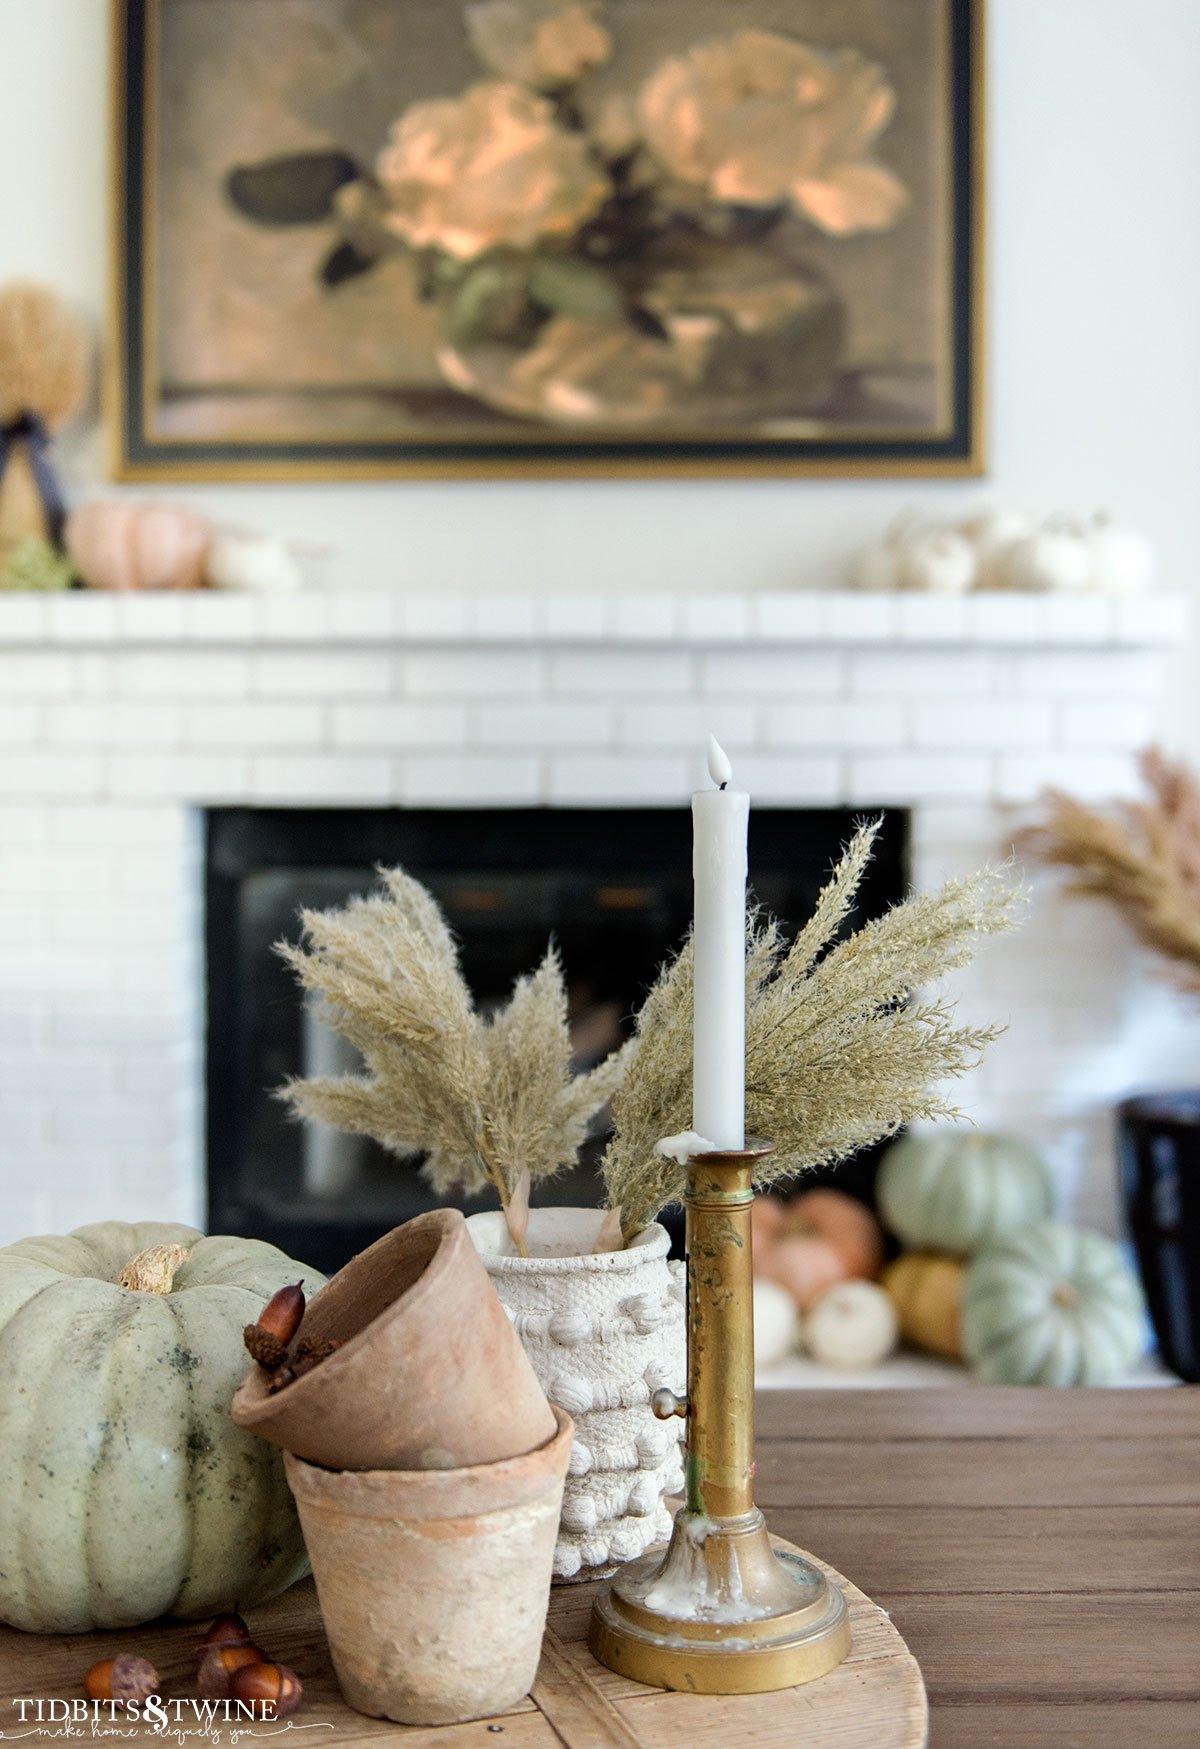 fall coffee table centerpiece with brass candlestick, small terracotta pots, green pumpkin and vase with grasses and fireplace in background